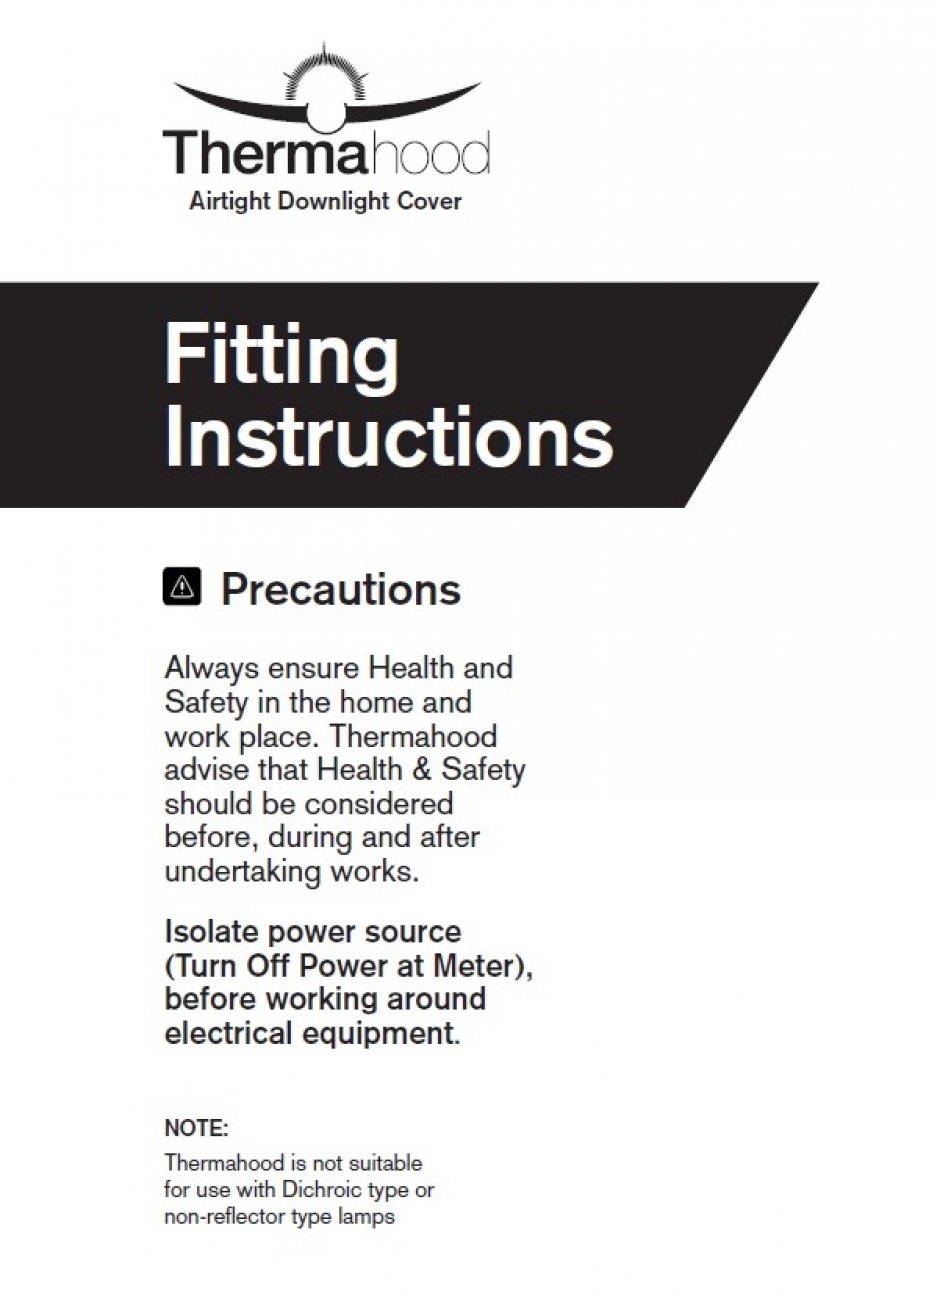 Thermahood fitting instructions precautions